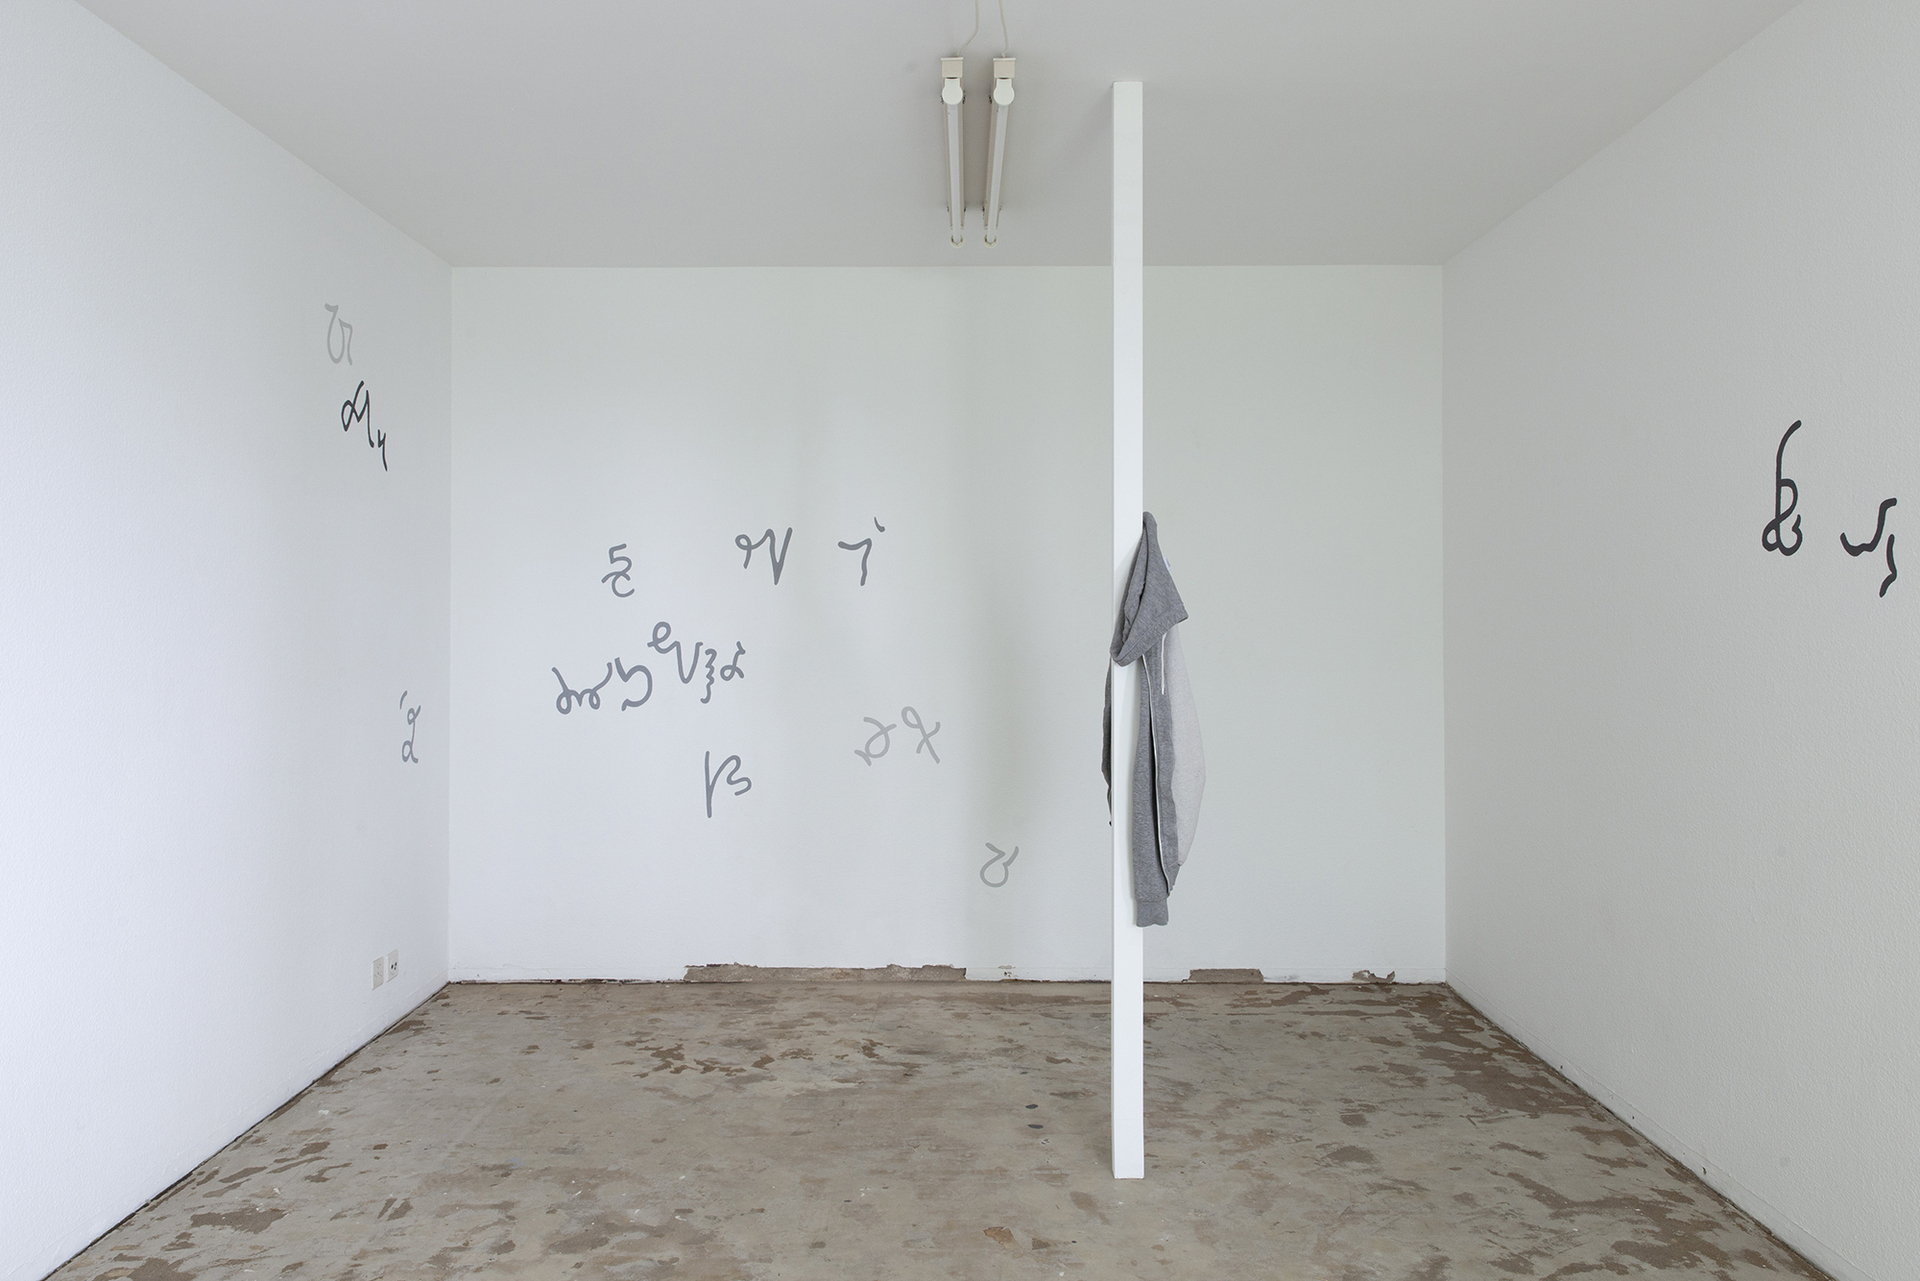 Nina Rieben, Loose attempts of a manifesto or love poem, 2020, paint on wall various dimensions.